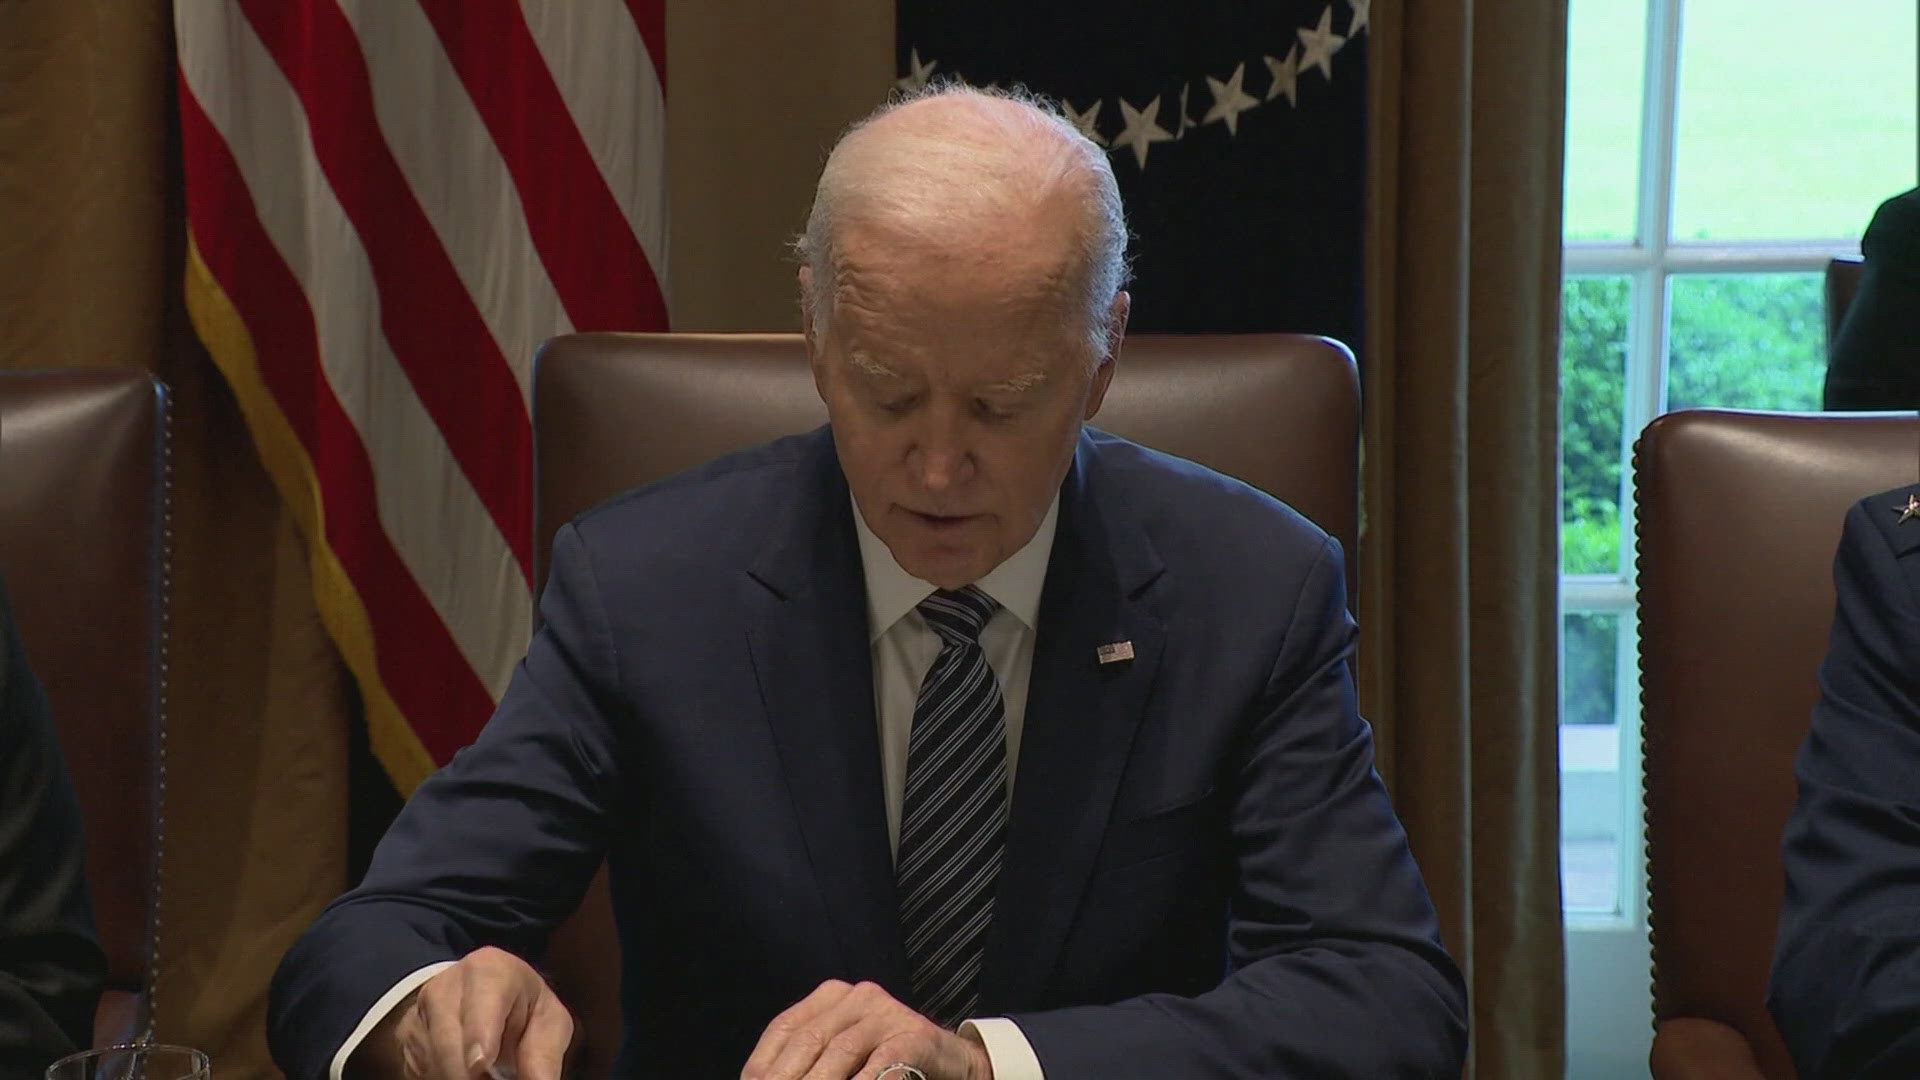 The briefing comes after legislators were unable to come up with a deal to ensure that President Joe Biden is on the Ohio ballot in the November election.